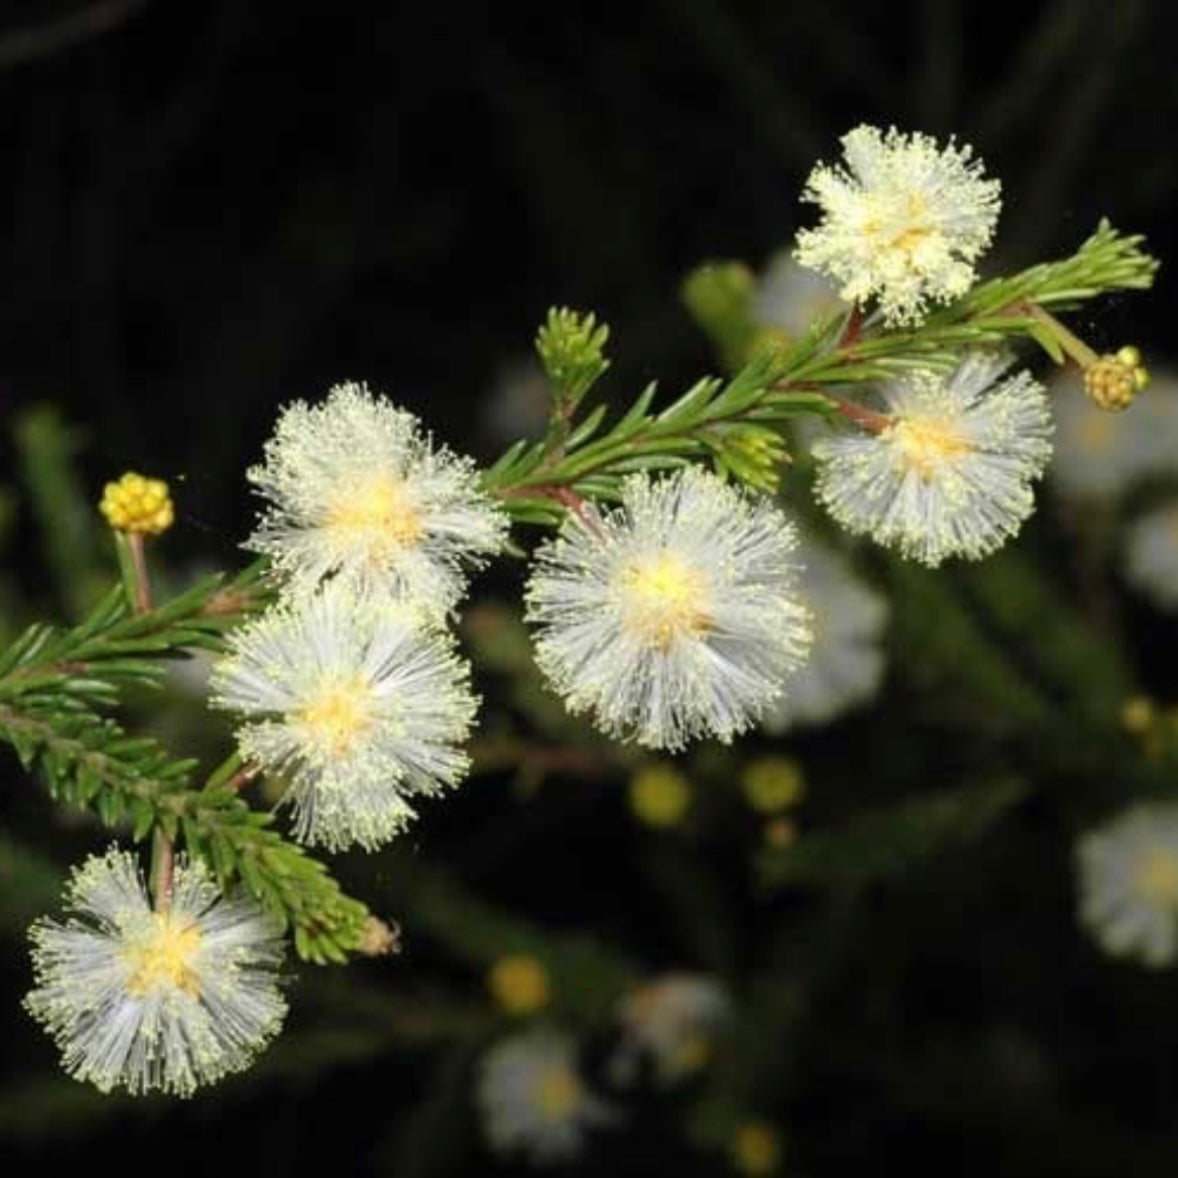 Brown Wattle - Acacia brunioides